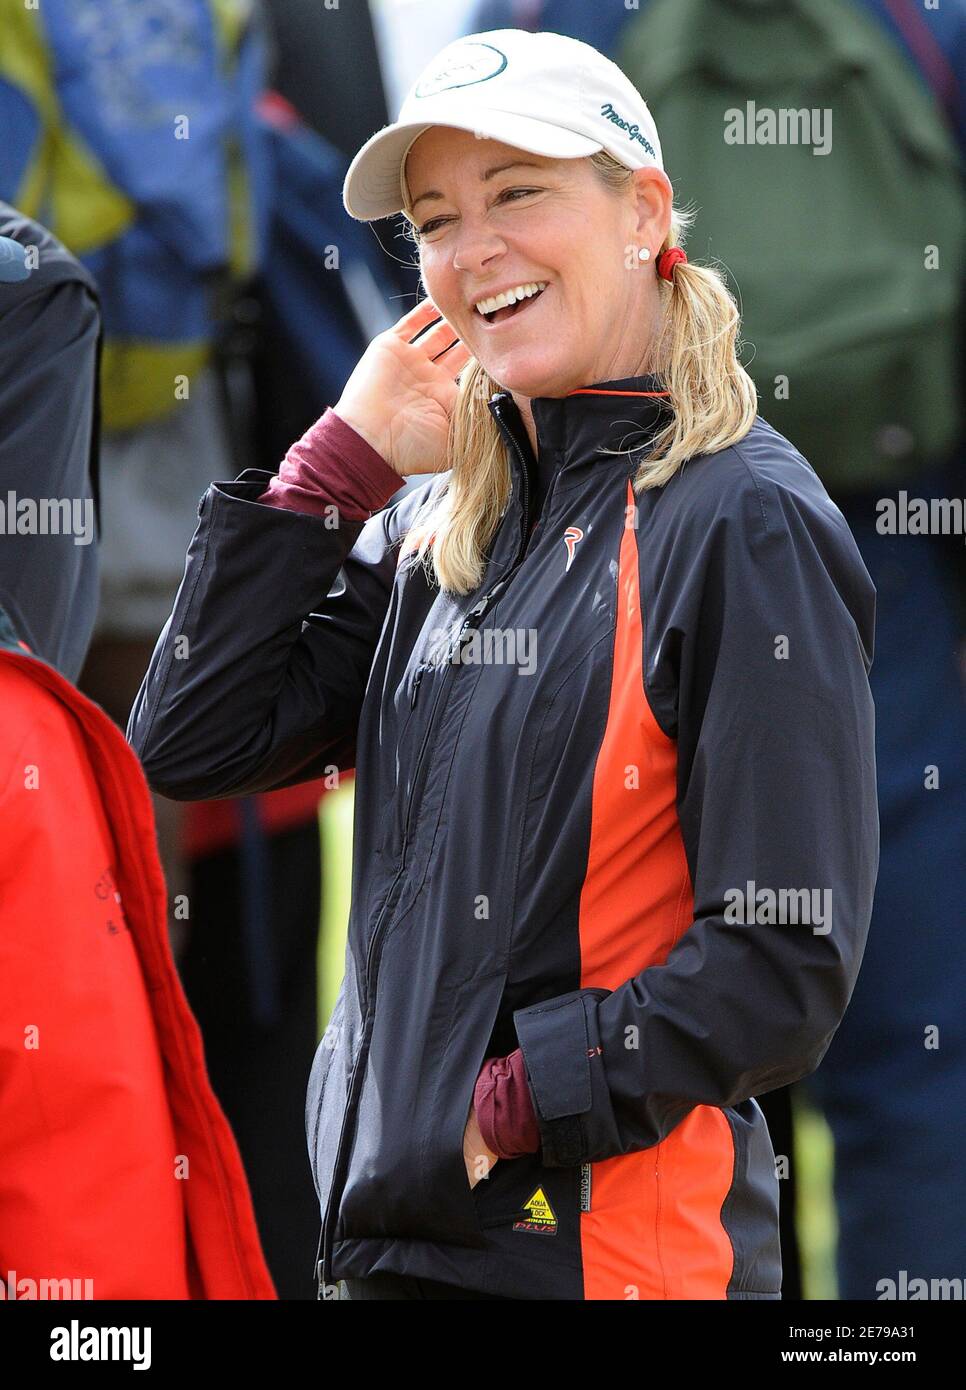 Former tennis star Chris Evert, wife of Australian golfer Greg Norman, watches third round play at the 2008 British Open Golf Championship at Royal Birkdale, Southport, northern England, July 19, 2008.     REUTERS/Russell Cheyne (BRITAIN) Stock Photo